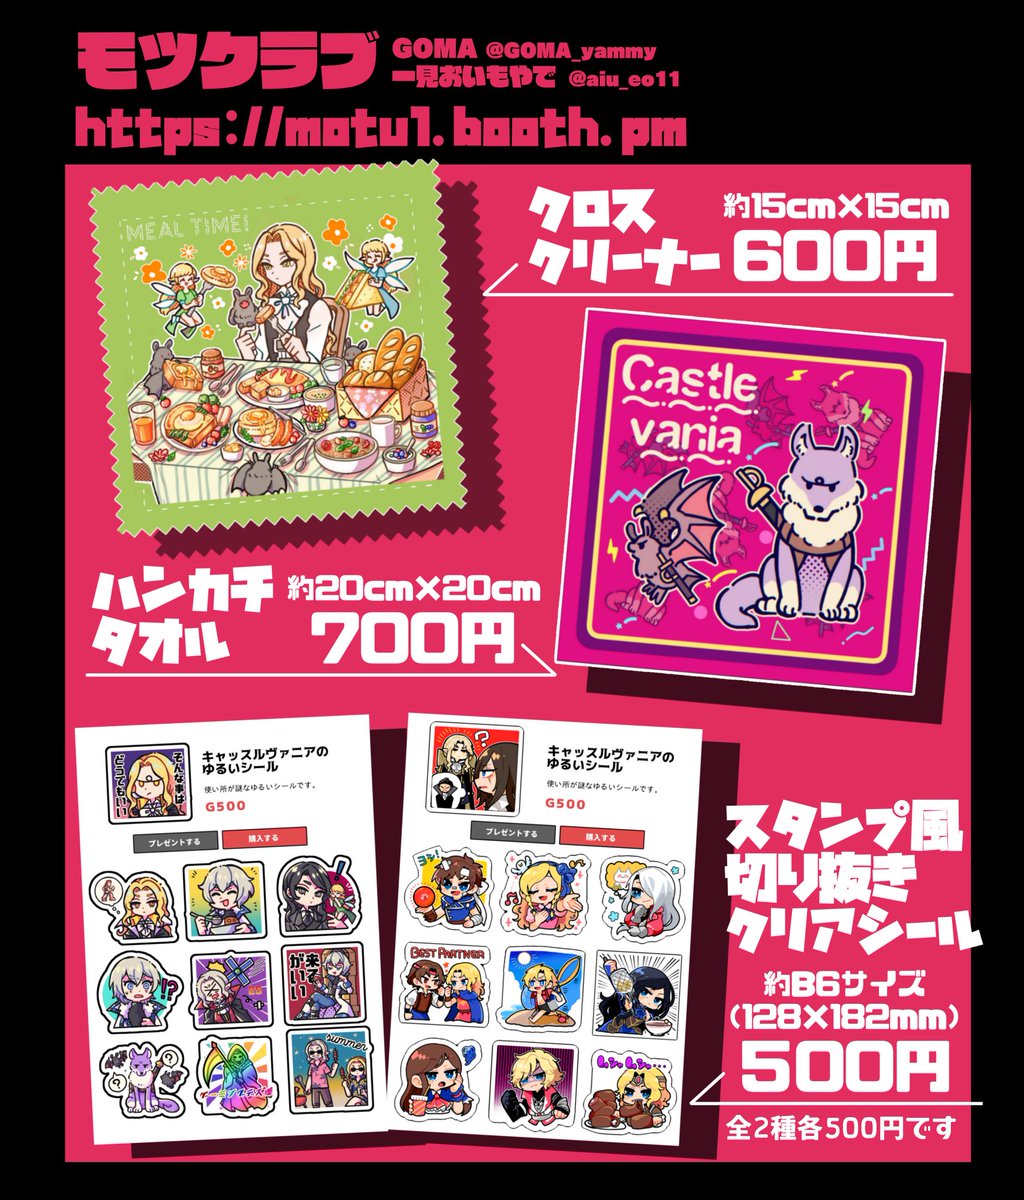 booth解放しました!グッズたくさんあります?
よろしくお願いします!
https://t.co/AxCslmiHts

Mail order notification:
Here is the link to my shop!>https://t.co/AxCslmiHts
Click here for BOOTH overseas shipping! > https://t.co/DDF2EFvGq9…

#オン魔城 #オン魔城2 (@daemonCastle) 